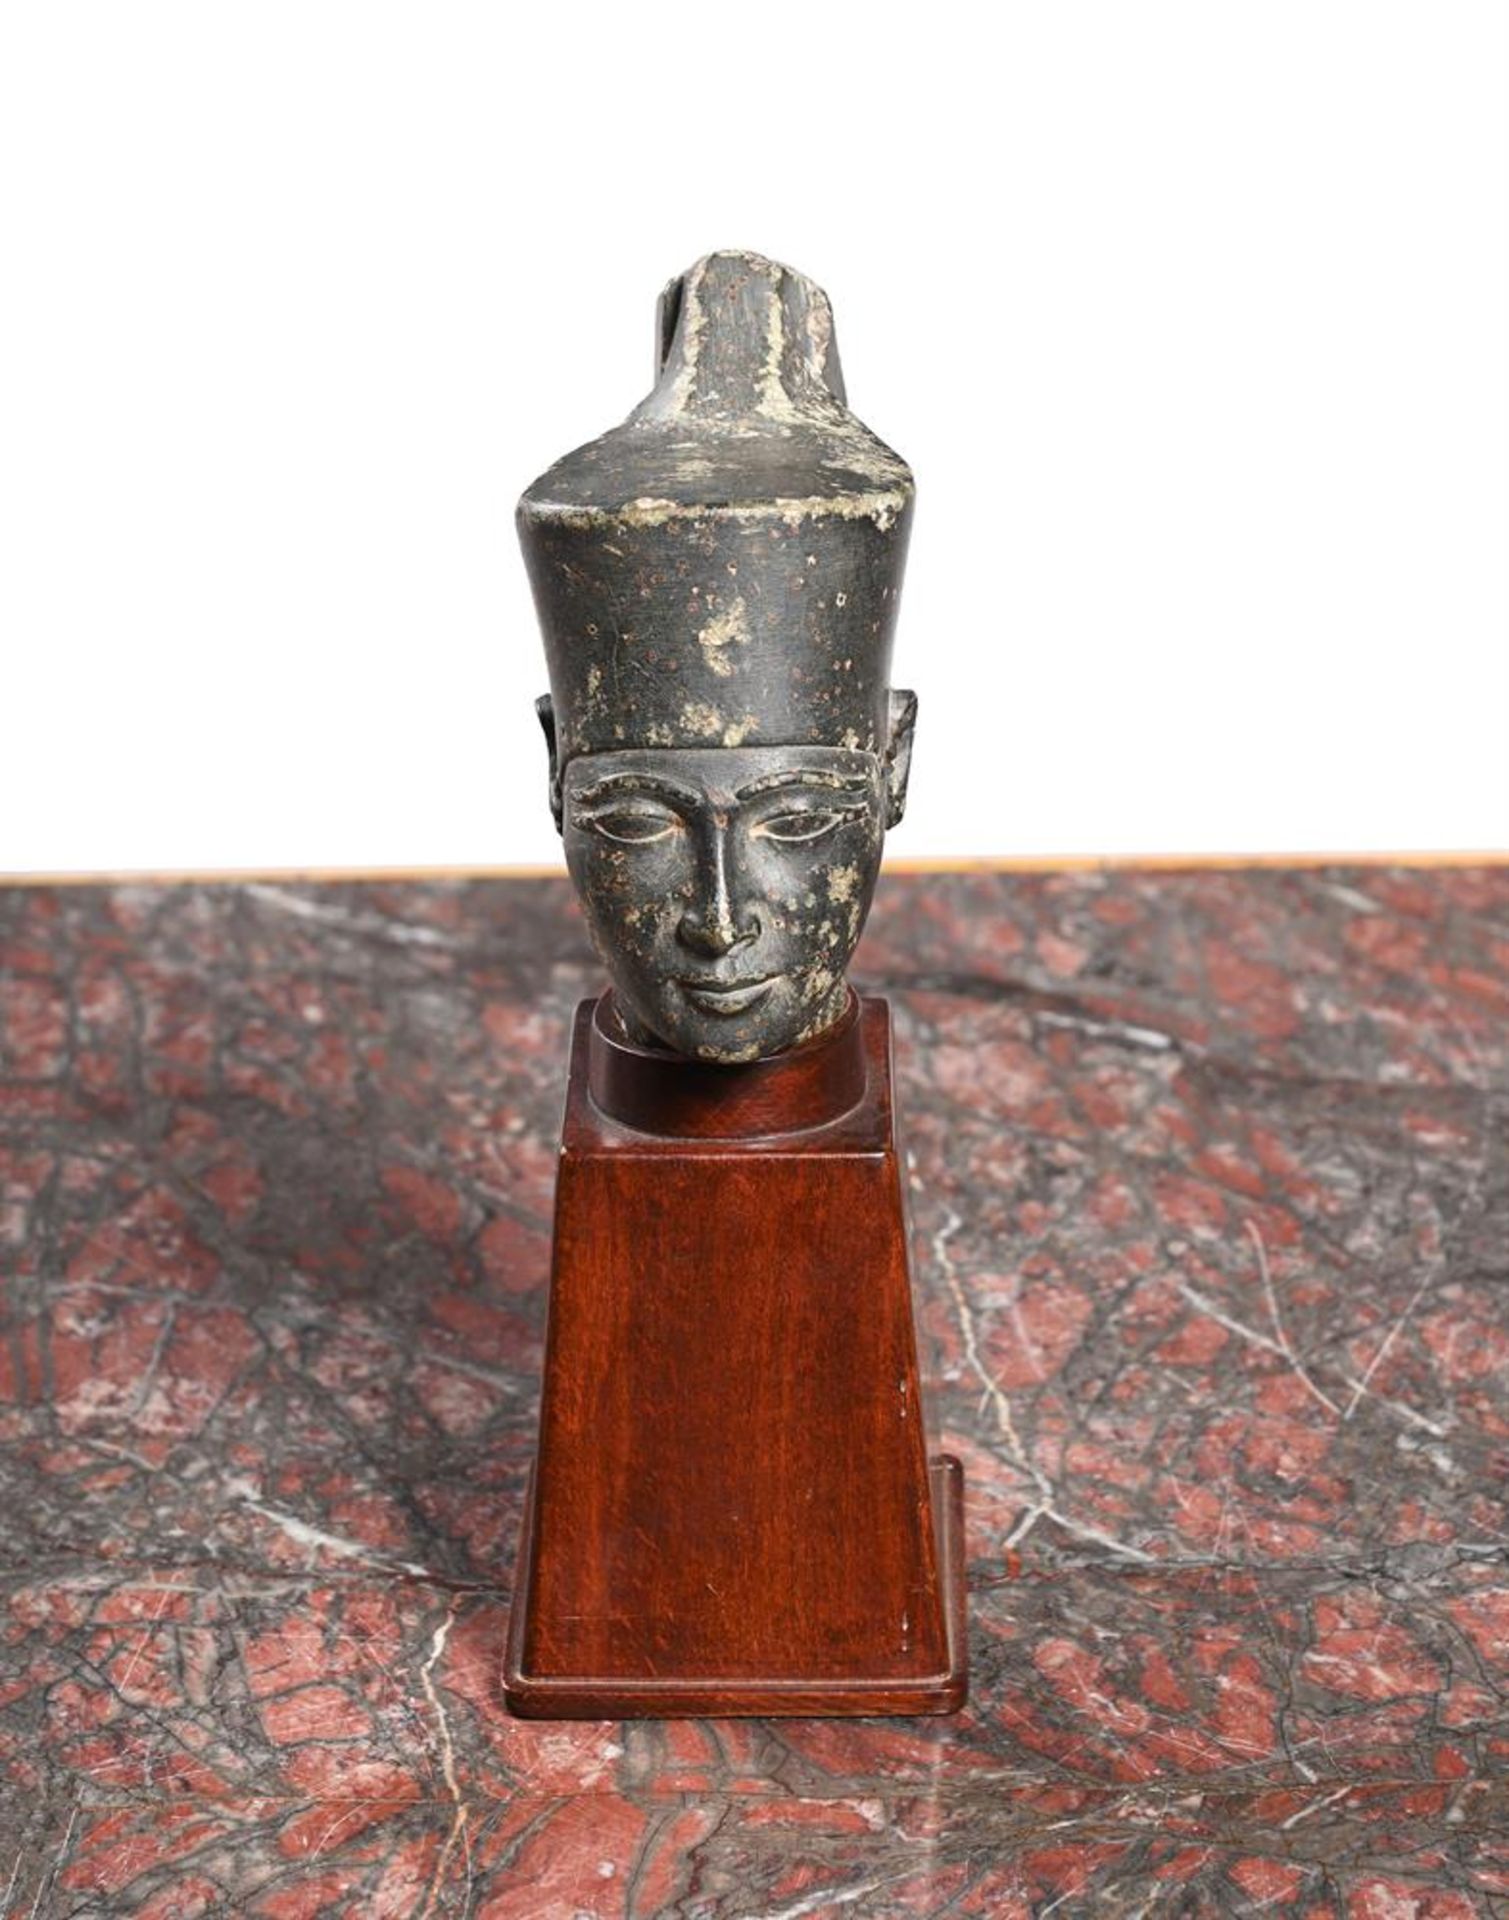 AFTER THE ANTIQUE, A MARBLE BUST FRAGMENT OF A PHAROAH'S HEAD, 19TH CENTURY OR EARLIER - Image 4 of 4